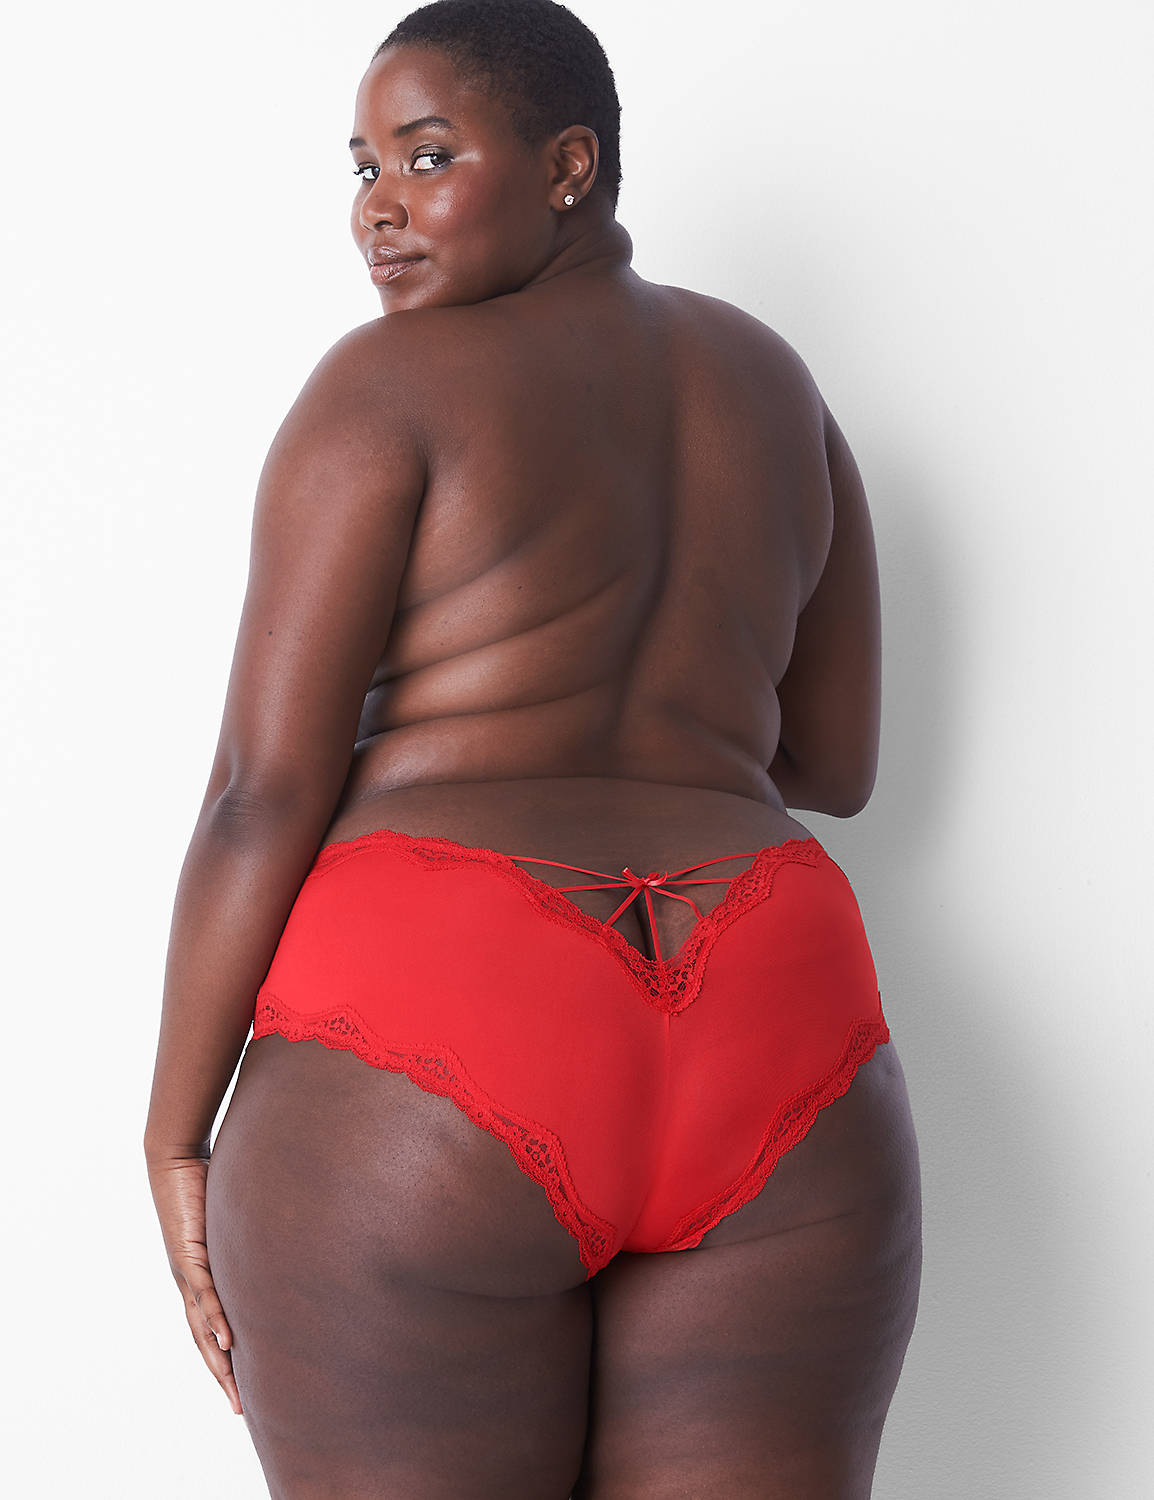 danielle sheldon recommends Phat Booty In Panties